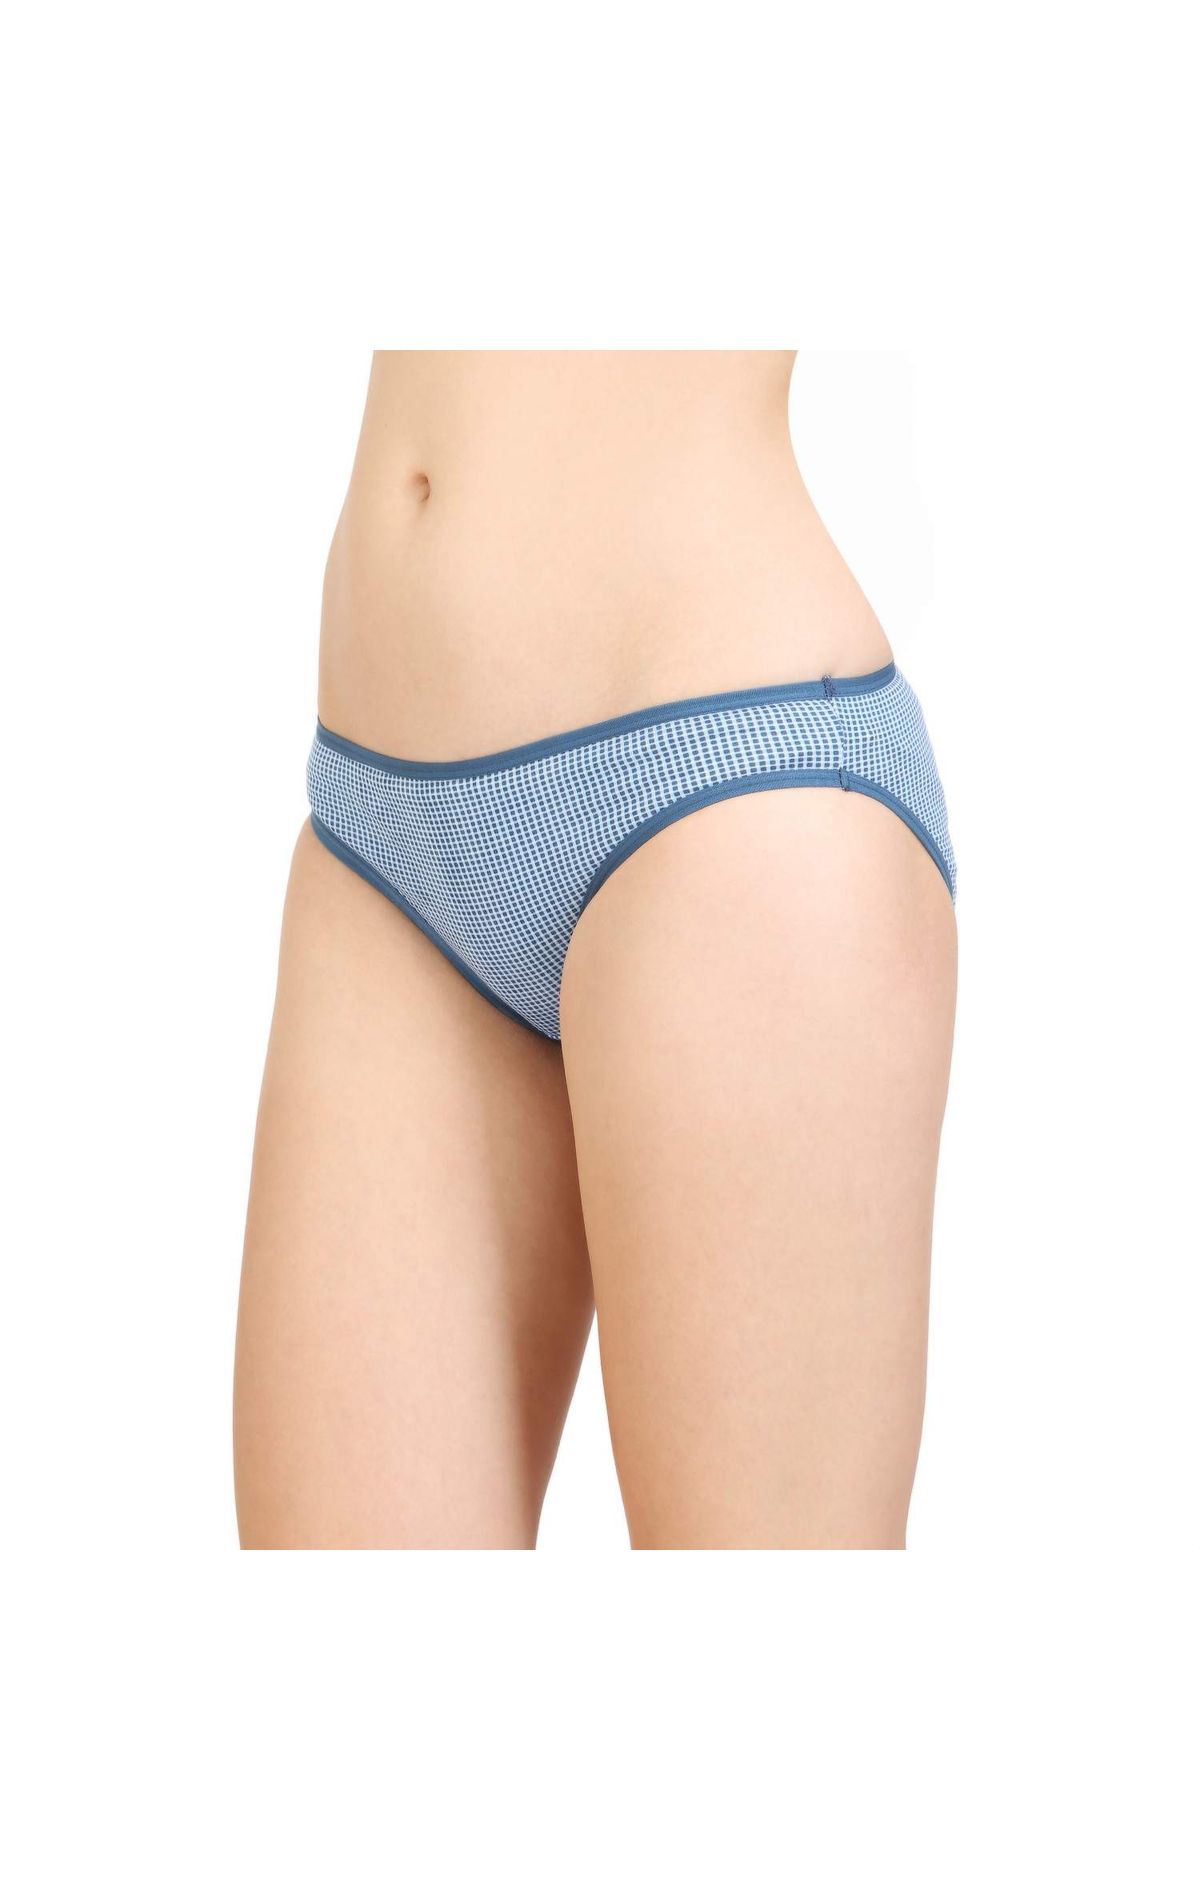 Bodycare Pack Of 3 Bikini Style Cotton Briefs In Assorted Colors With Broad  Elastic Band-e45d, E45d